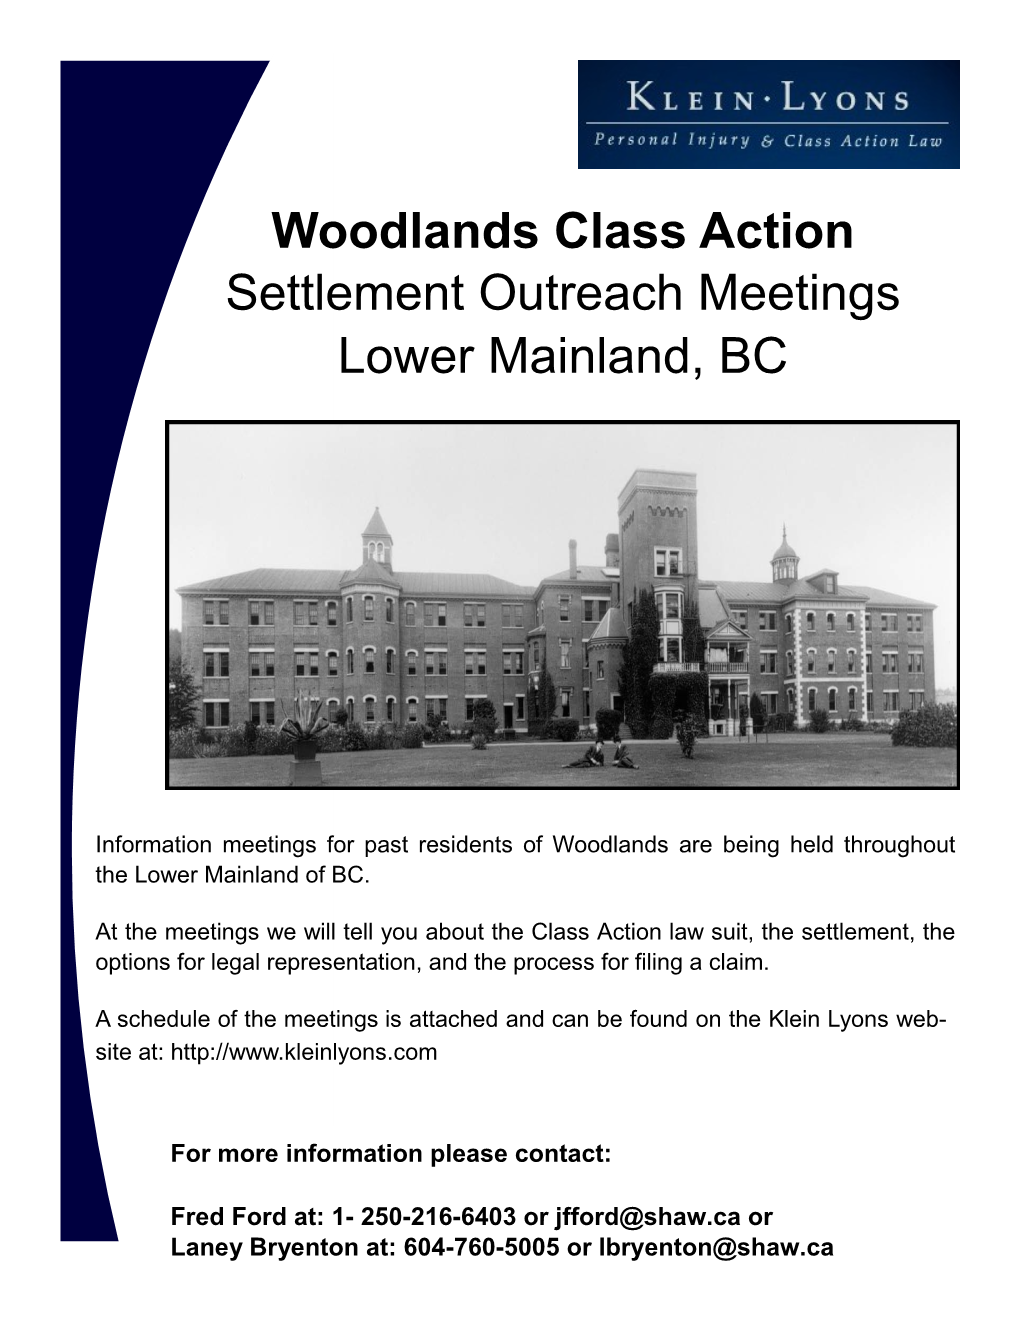 Woodlands Class Action Settlement Outreach Meetings Lower Mainland, BC